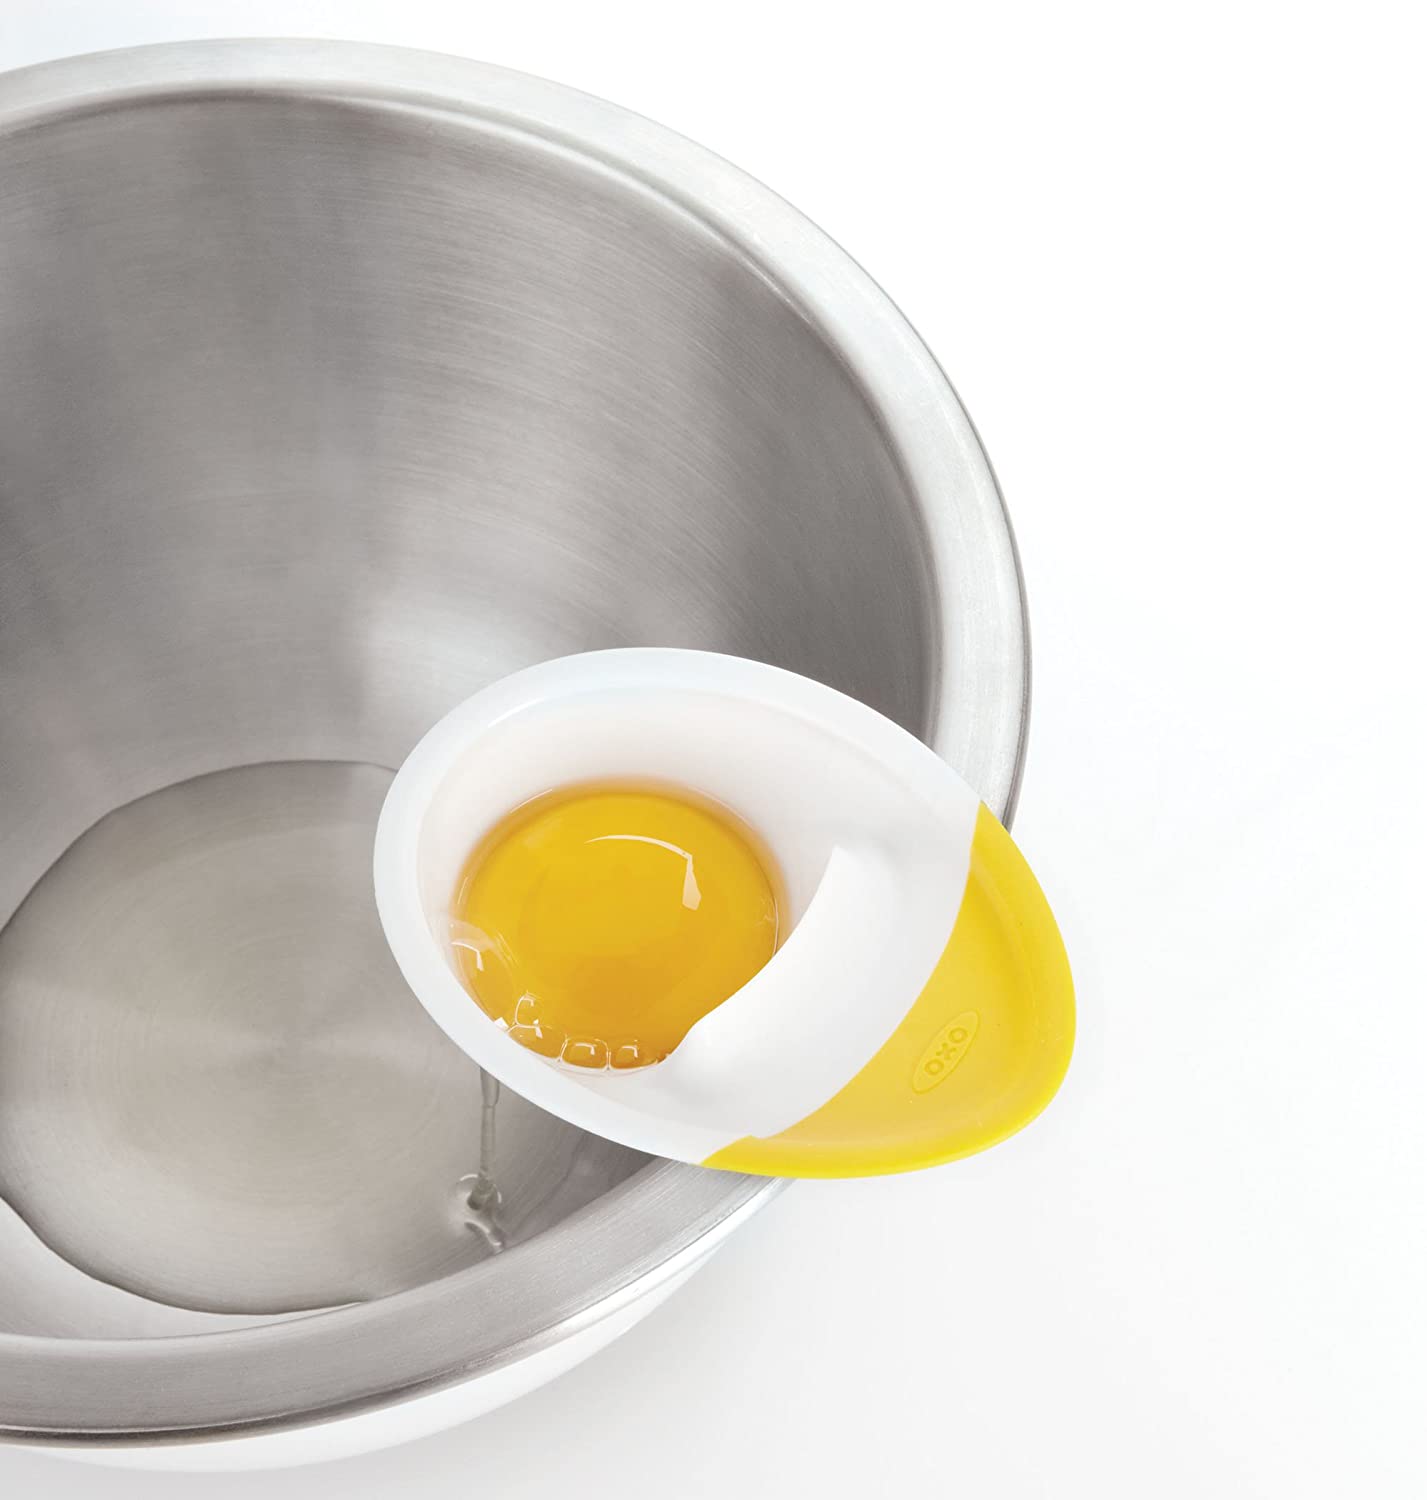 egg separator with yolk in it on bowl edge.